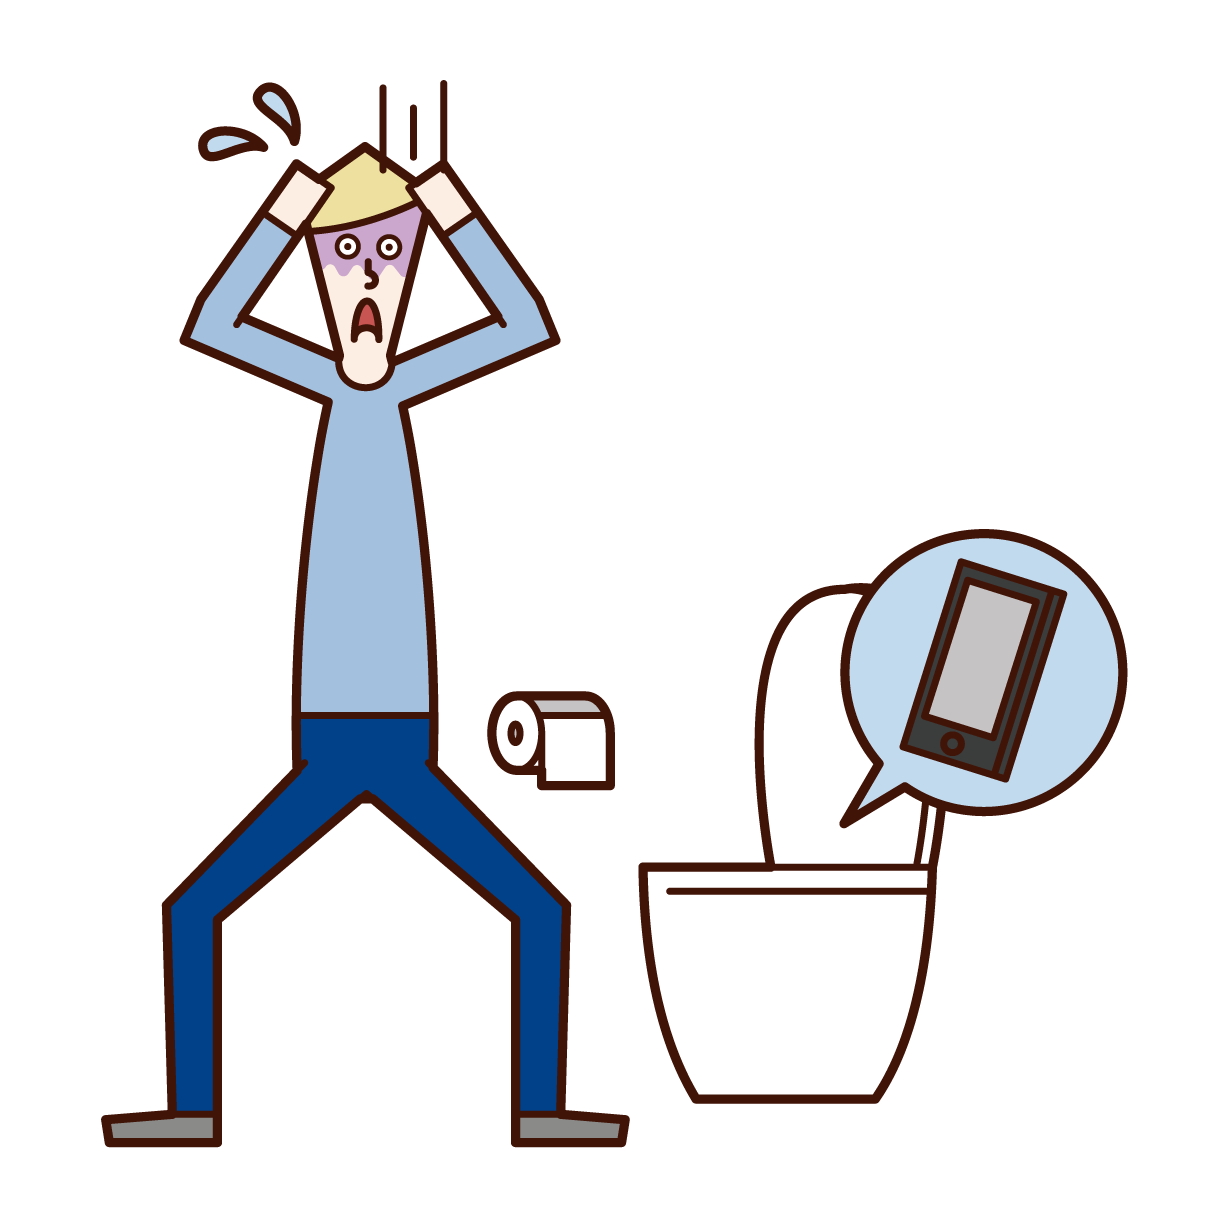 Illustration of a man dropping his smartphone on a toilet bowl